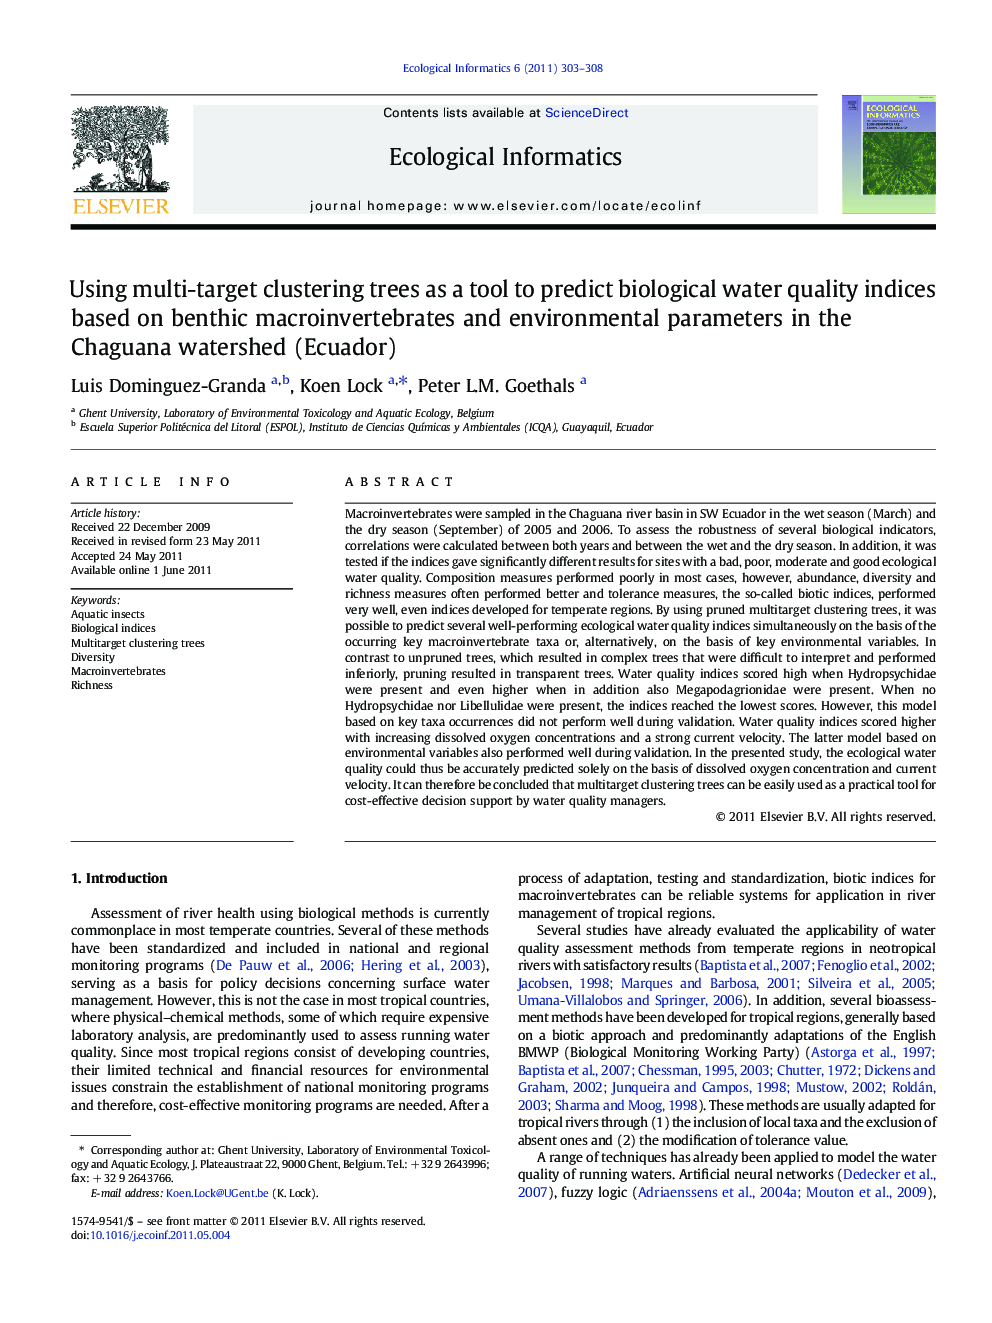 Using multi-target clustering trees as a tool to predict biological water quality indices based on benthic macroinvertebrates and environmental parameters in the Chaguana watershed (Ecuador)